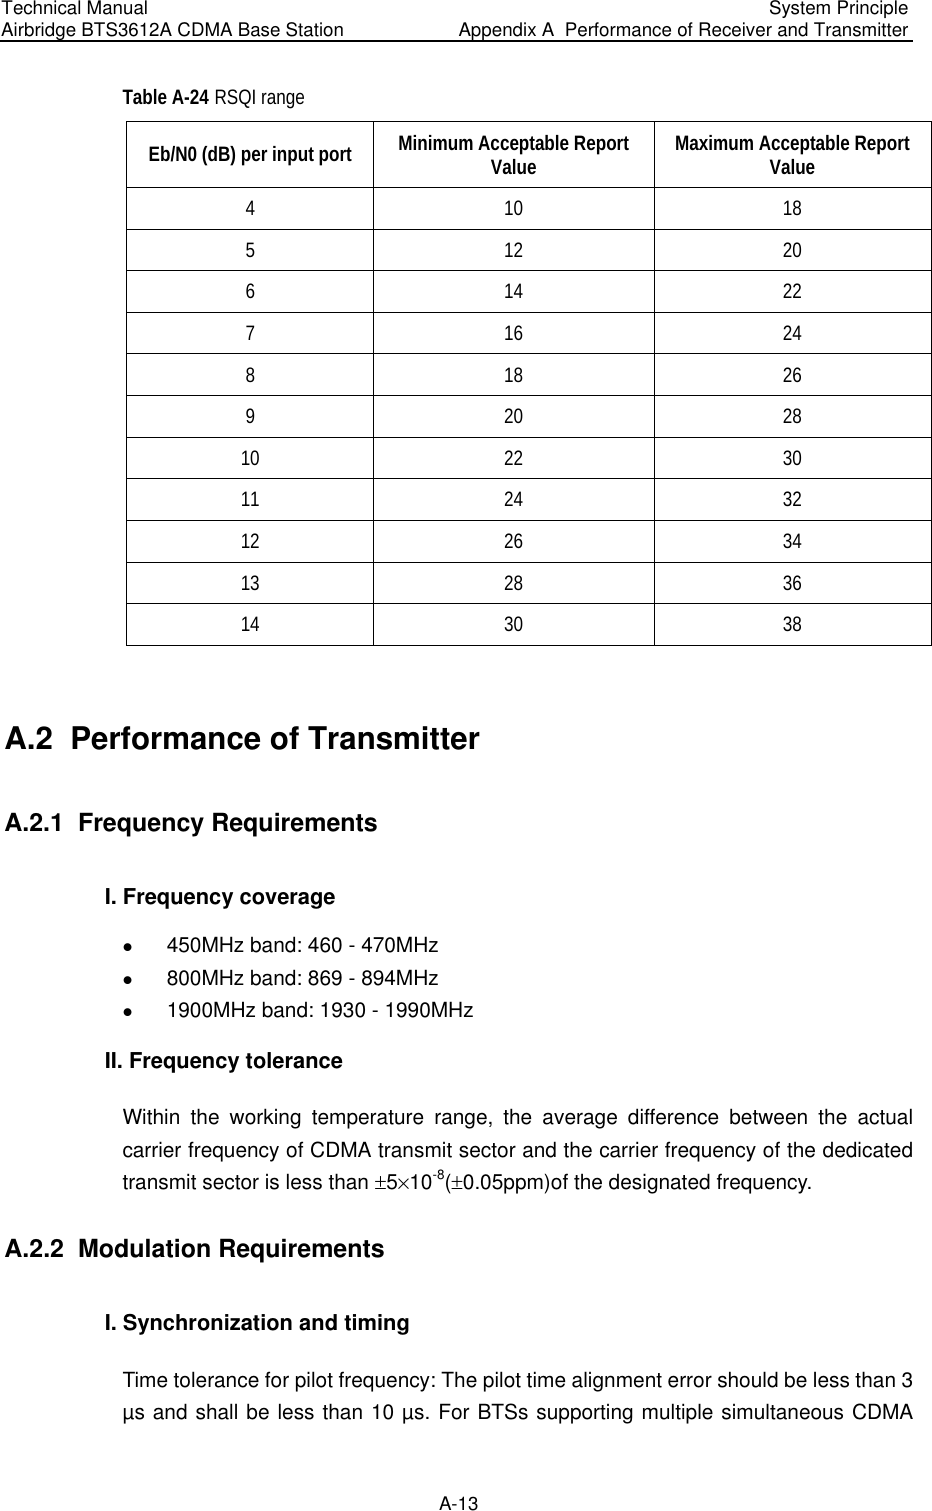 Technical Manual Airbridge BTS3612A CDMA Base Station  System Principle Appendix A  Performance of Receiver and Transmitter  A-13 Table A-24 RSQI range Eb/N0 (dB) per input port  Minimum Acceptable Report Value  Maximum Acceptable Report Value 4 10  18 5 12  20 6 14  22 7 16  24 8 18  26 9 20  28 10 22  30 11 24  32 12 26  34 13 28  36 14 30  38  A.2  Performance of Transmitter  A.2.1  Frequency Requirements I. Frequency coverage z 450MHz band: 460 - 470MHz z 800MHz band: 869 - 894MHz z 1900MHz band: 1930 - 1990MHz II. Frequency tolerance  Within the working temperature range, the average difference between the actual carrier frequency of CDMA transmit sector and the carrier frequency of the dedicated transmit sector is less than !5%10-8(!0.05ppm)of the designated frequency.  A.2.2  Modulation Requirements I. Synchronization and timing Time tolerance for pilot frequency: The pilot time alignment error should be less than 3 µs and shall be less than 10 µs. For BTSs supporting multiple simultaneous CDMA 